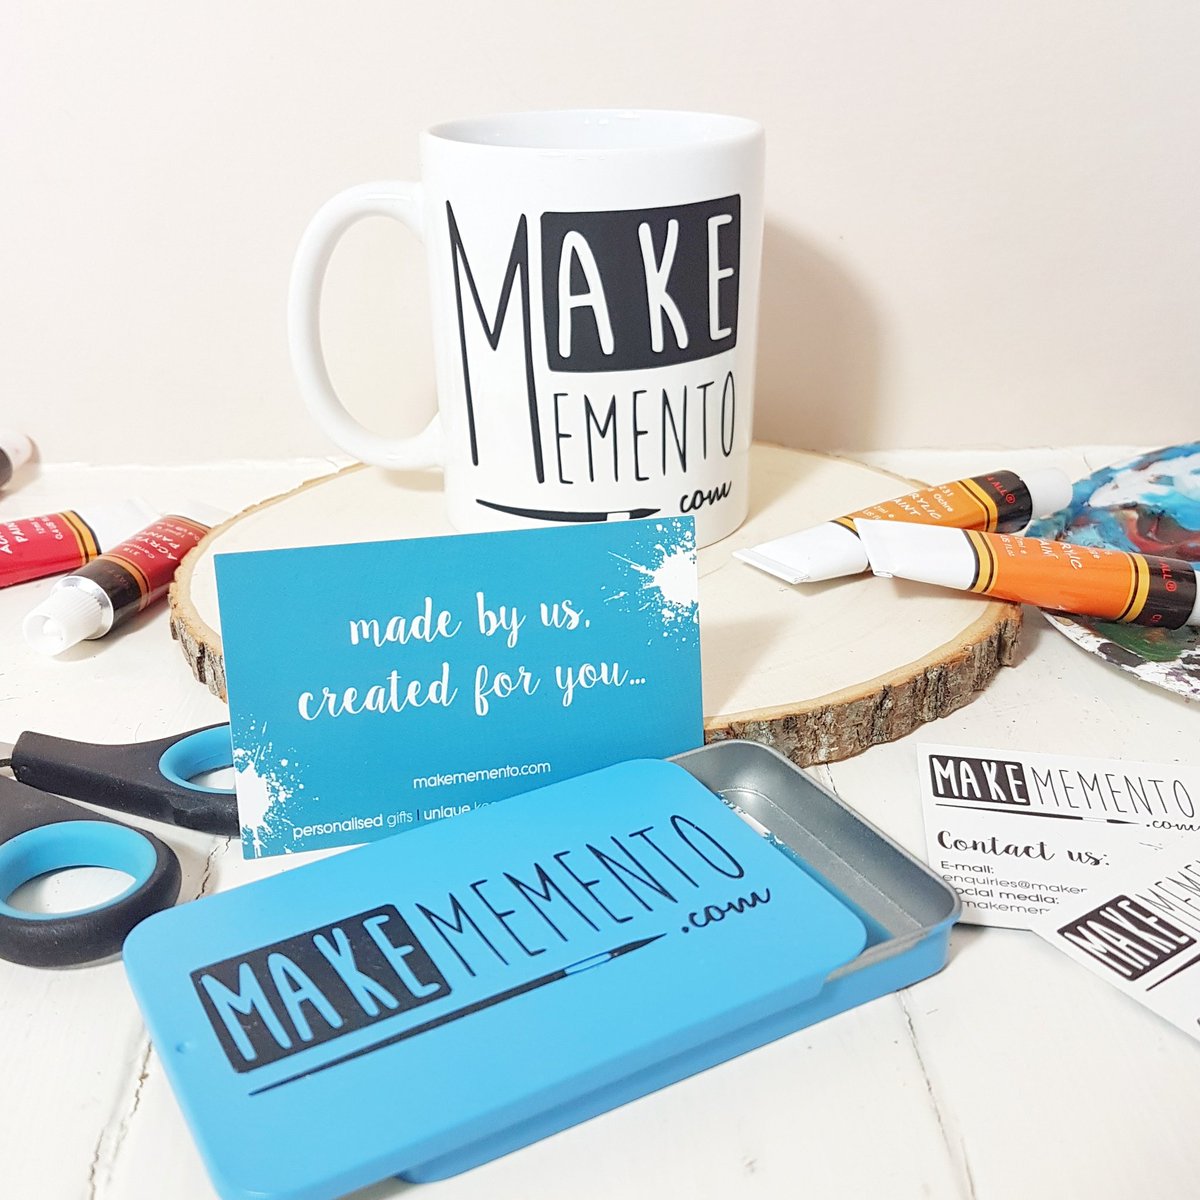 Where to go for the perfect gift? makememento.com! Shop online now & get 10% off any order using voucher code THANKYOU10! #shop #shopping #discount #offer #gifts #giftideas